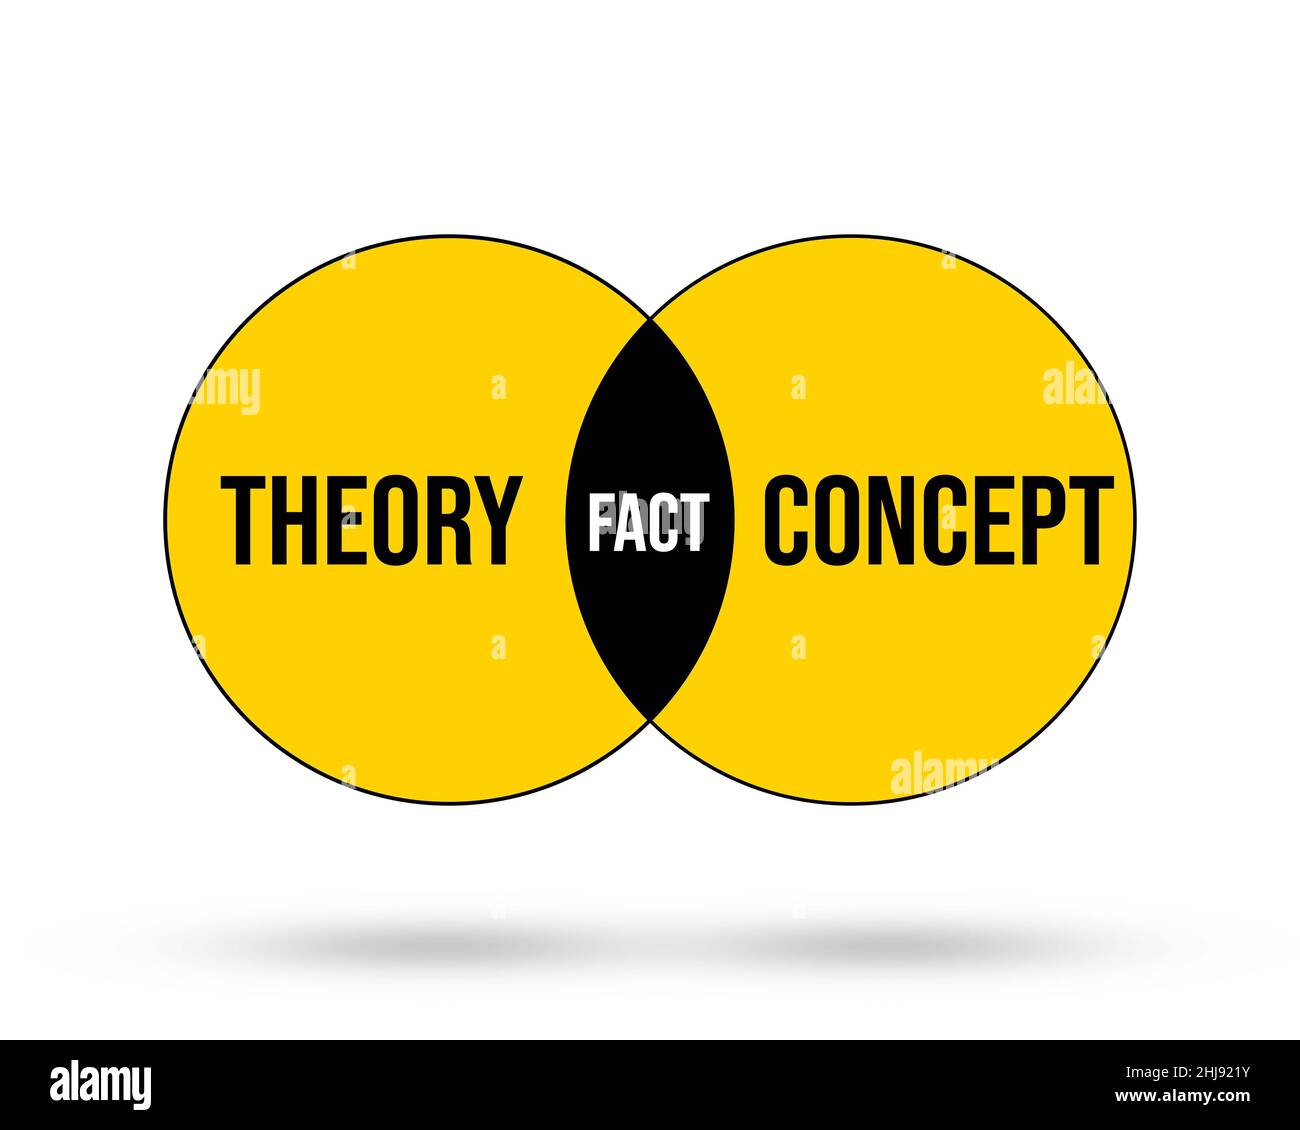 Theory and Concept Sharing Diagram with the Common part of Fact on White Backdrop. Yellow Circles Diagram for theory and fact Stock Photo